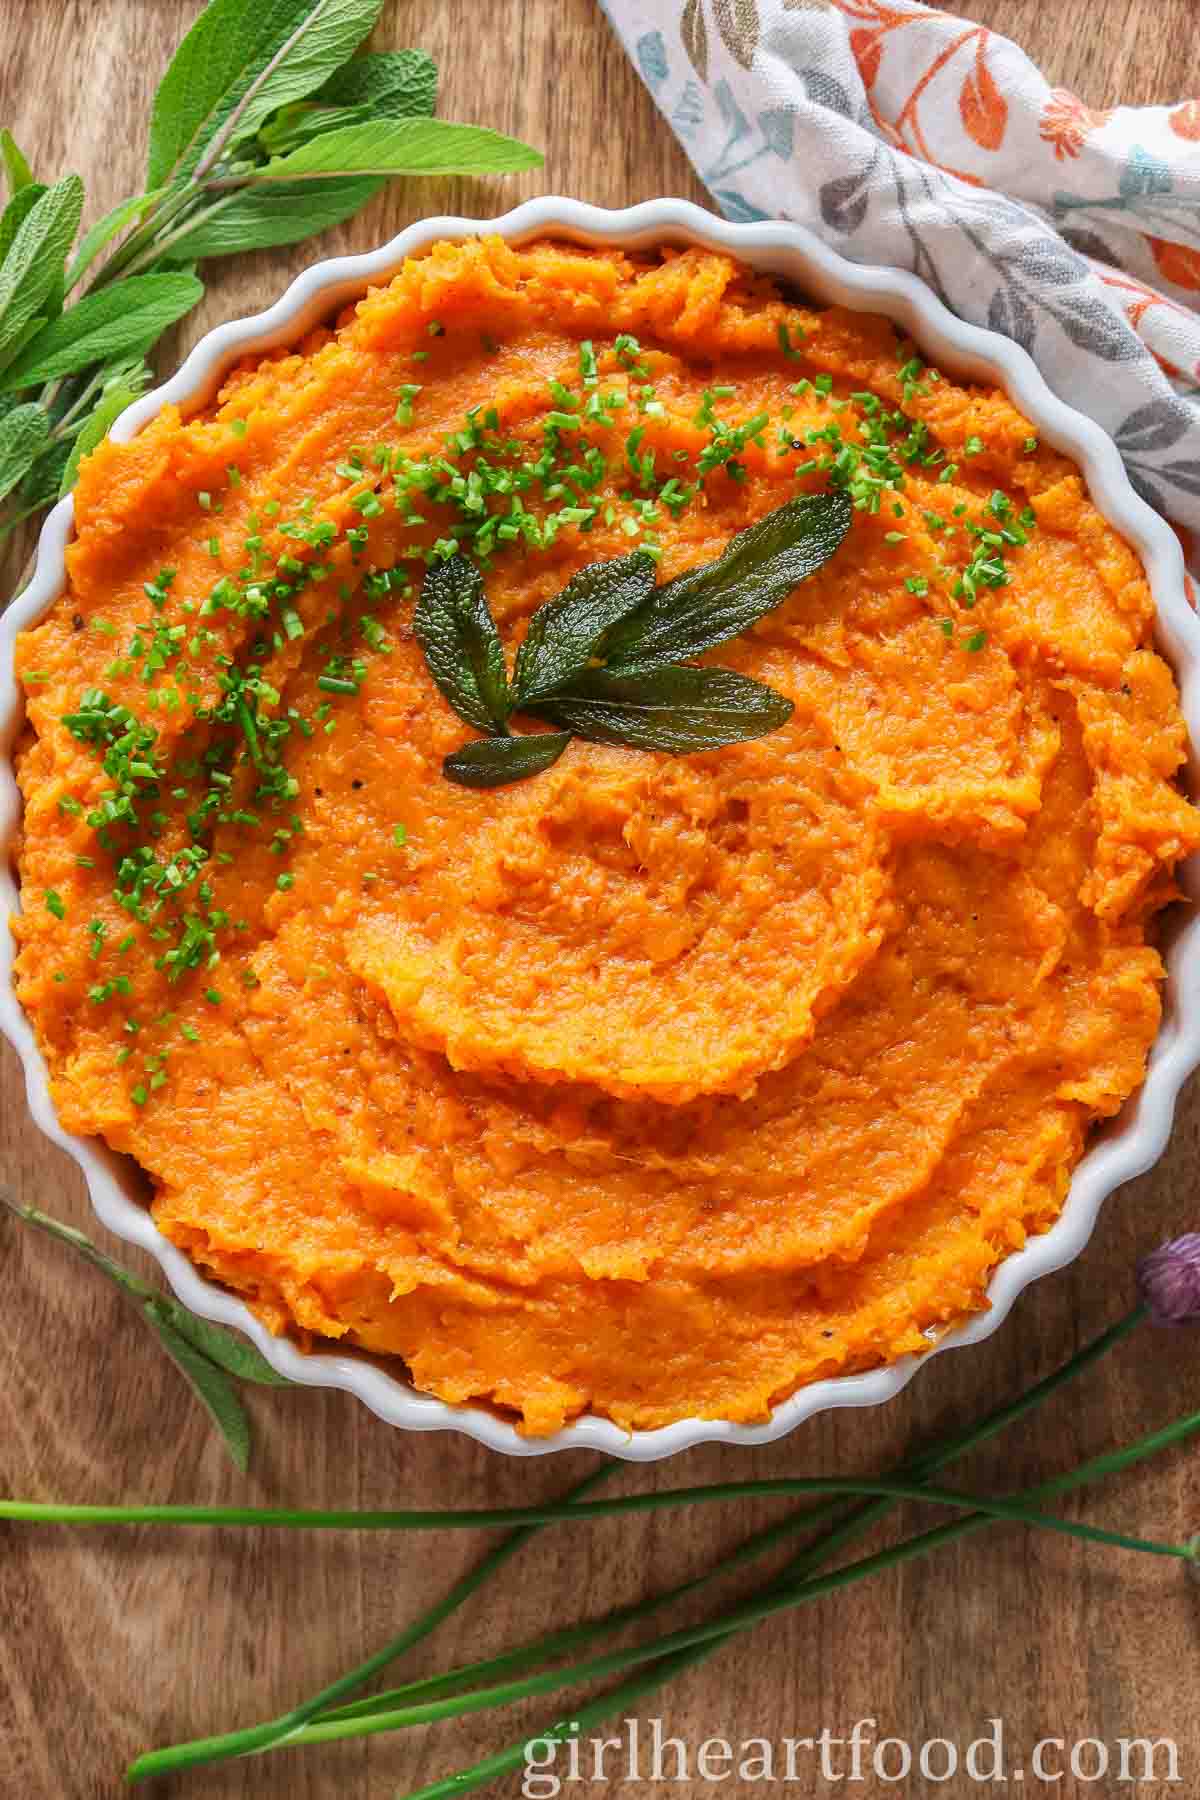 Dish of mashed butternut squash and sweet potato garnished with chives and  sage leaves.